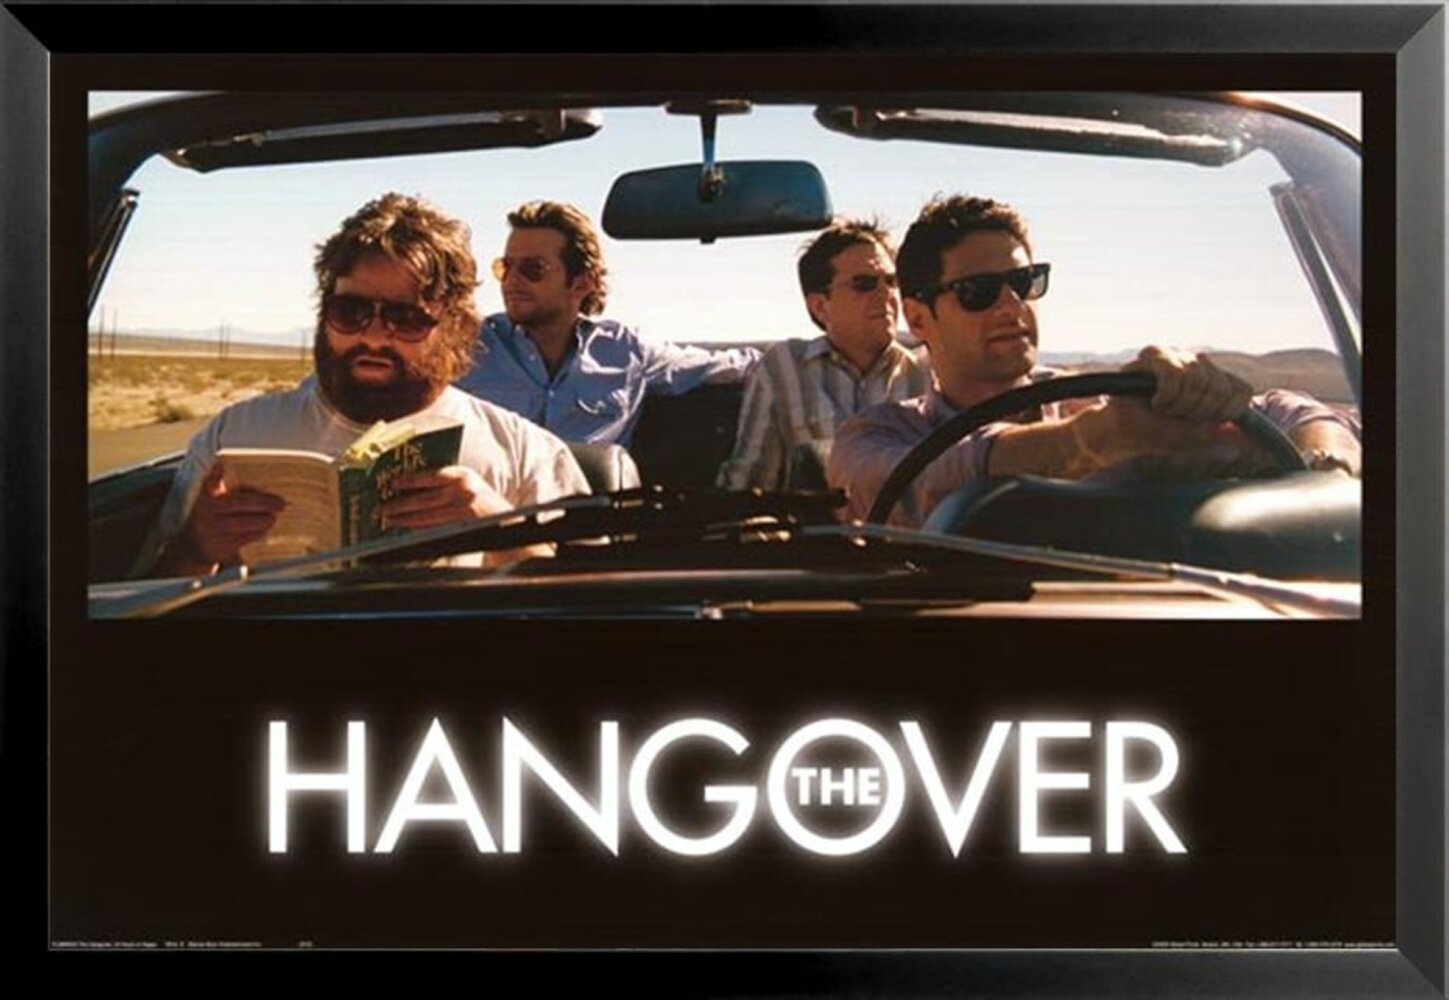 Zach Galifianakis and Bradley Cooper in THE HANGOVER Screening at